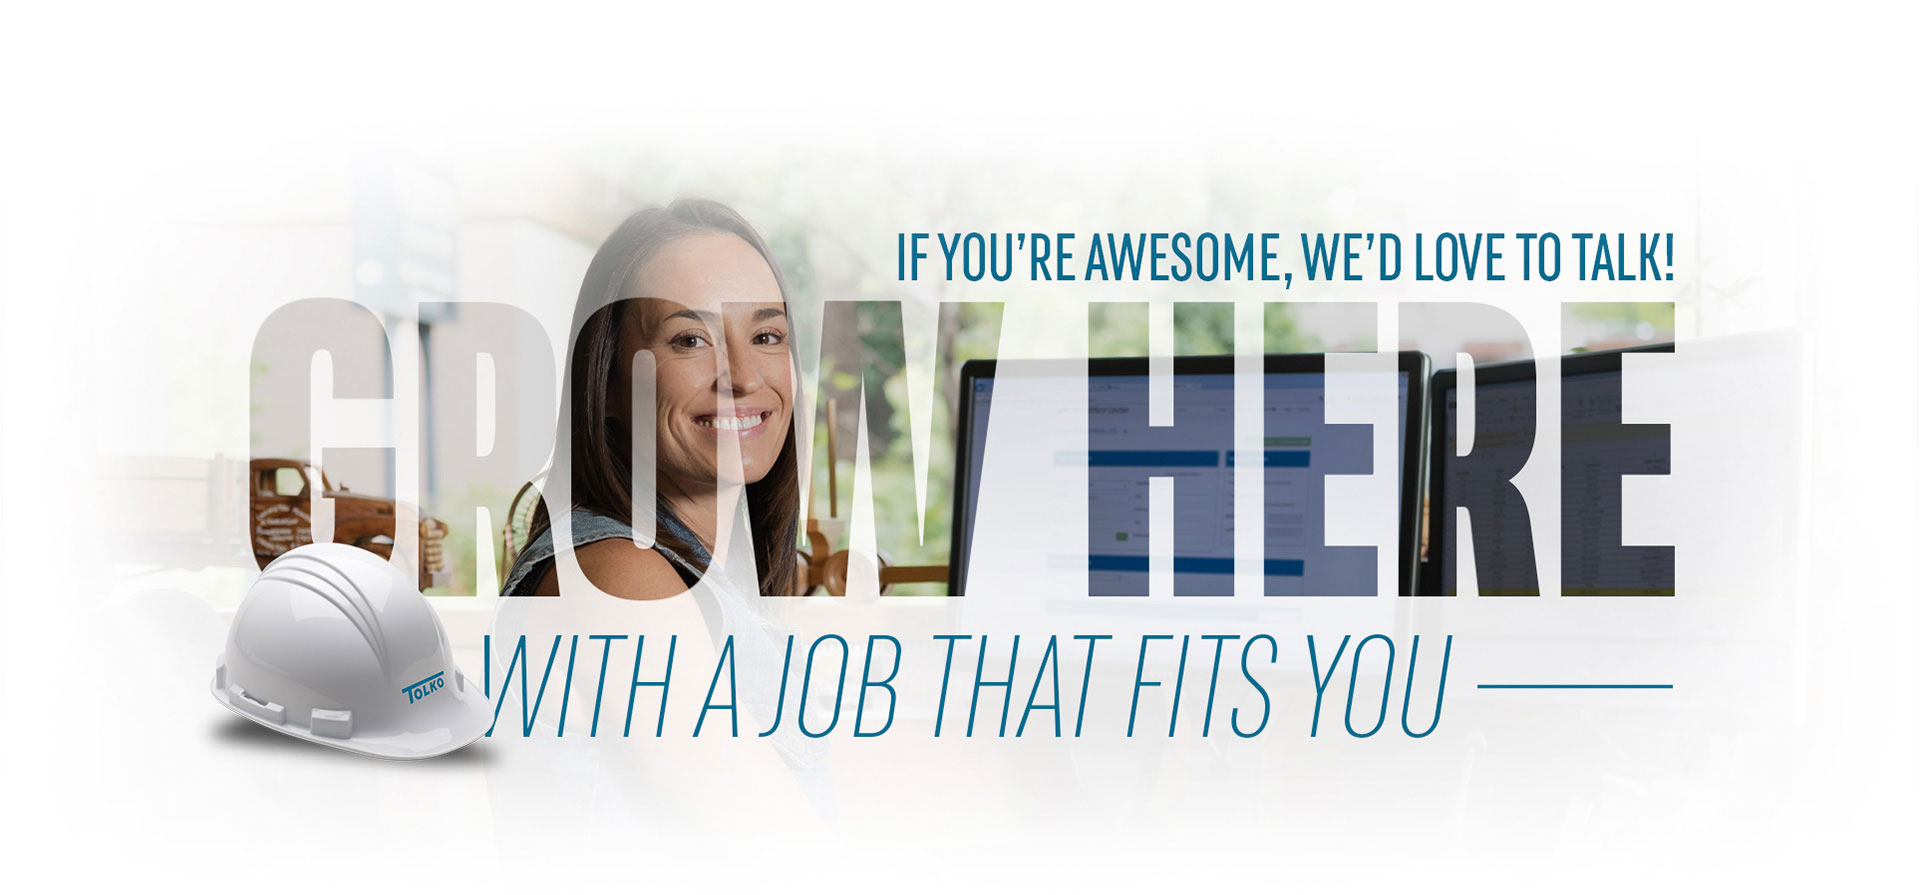 If you're awesome, we'd love to talk! Grow here with a job that fits you